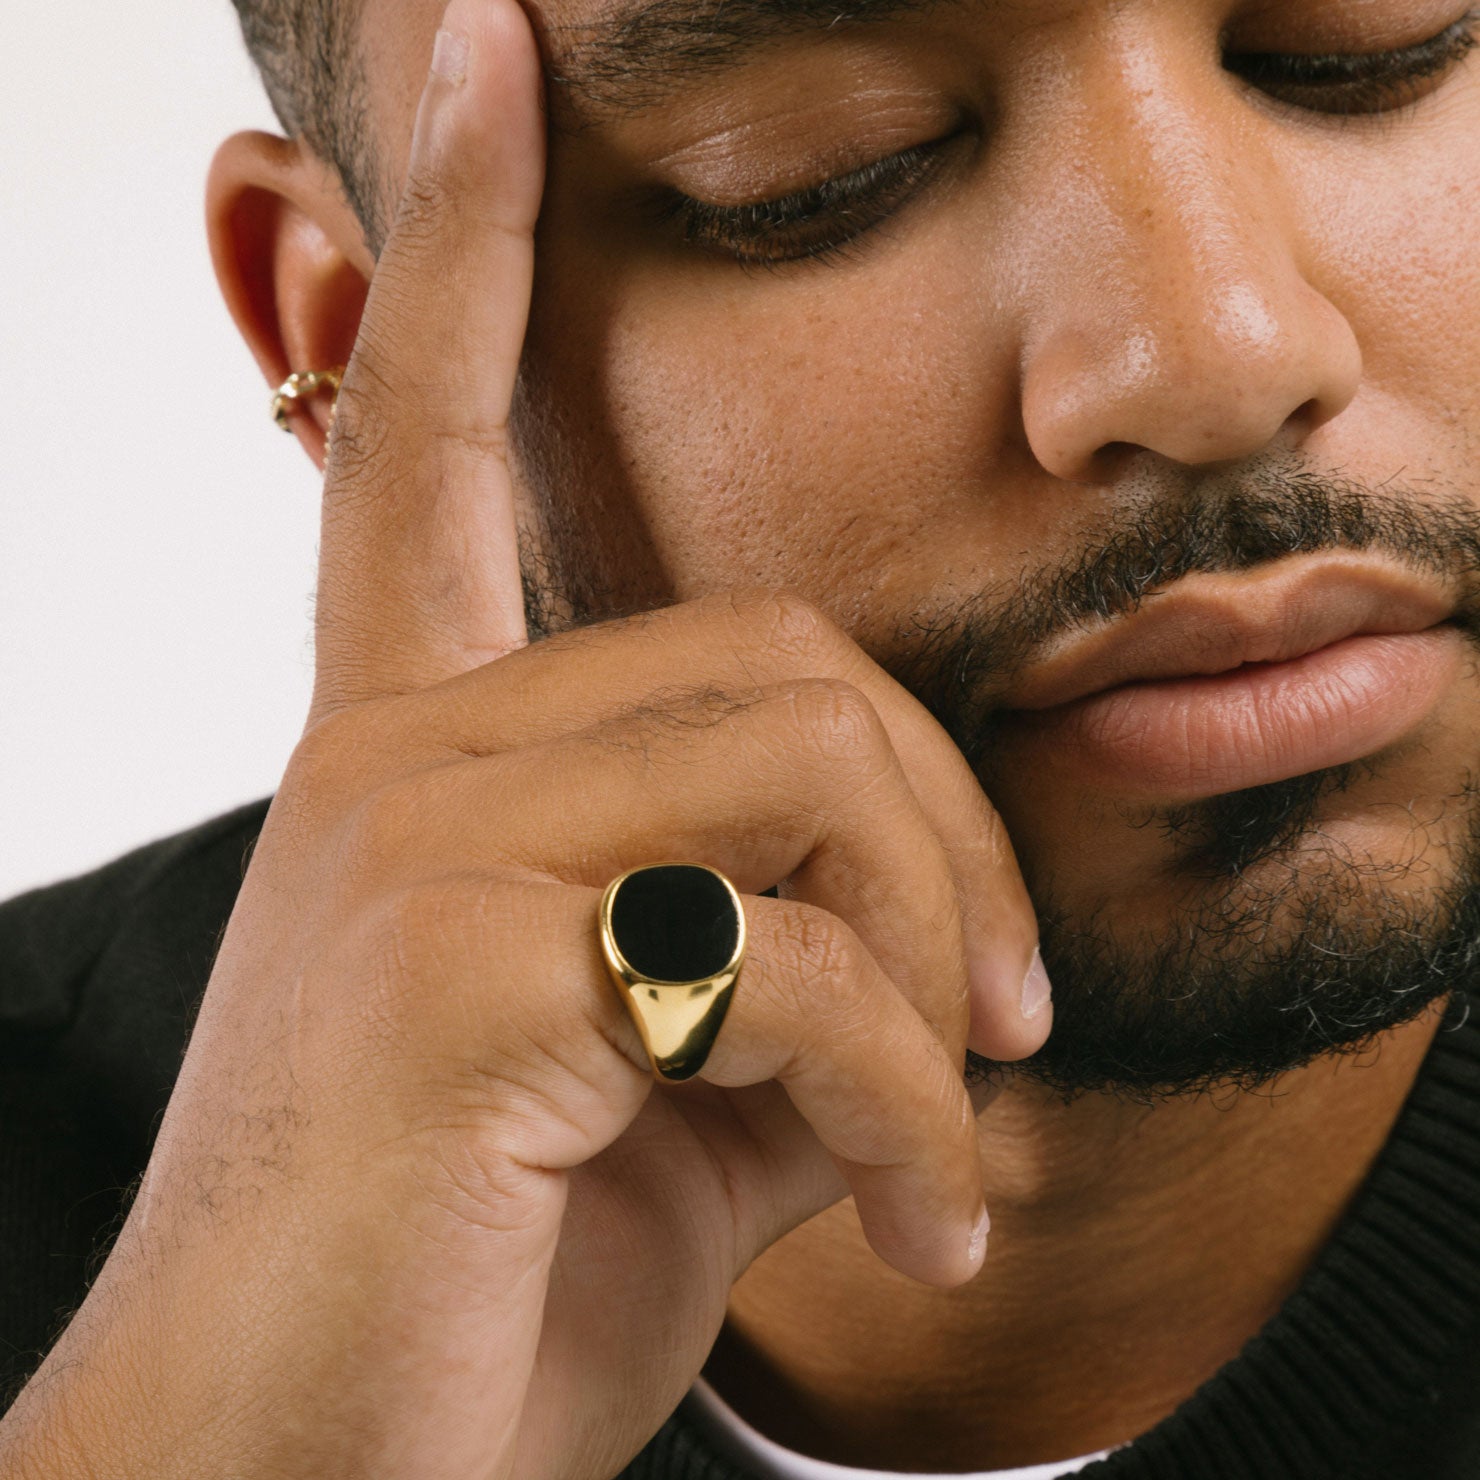 A model wearing the Black Signet Ring is crafted with 18K Gold Plating, which is resistant to tarnishing and water damage.